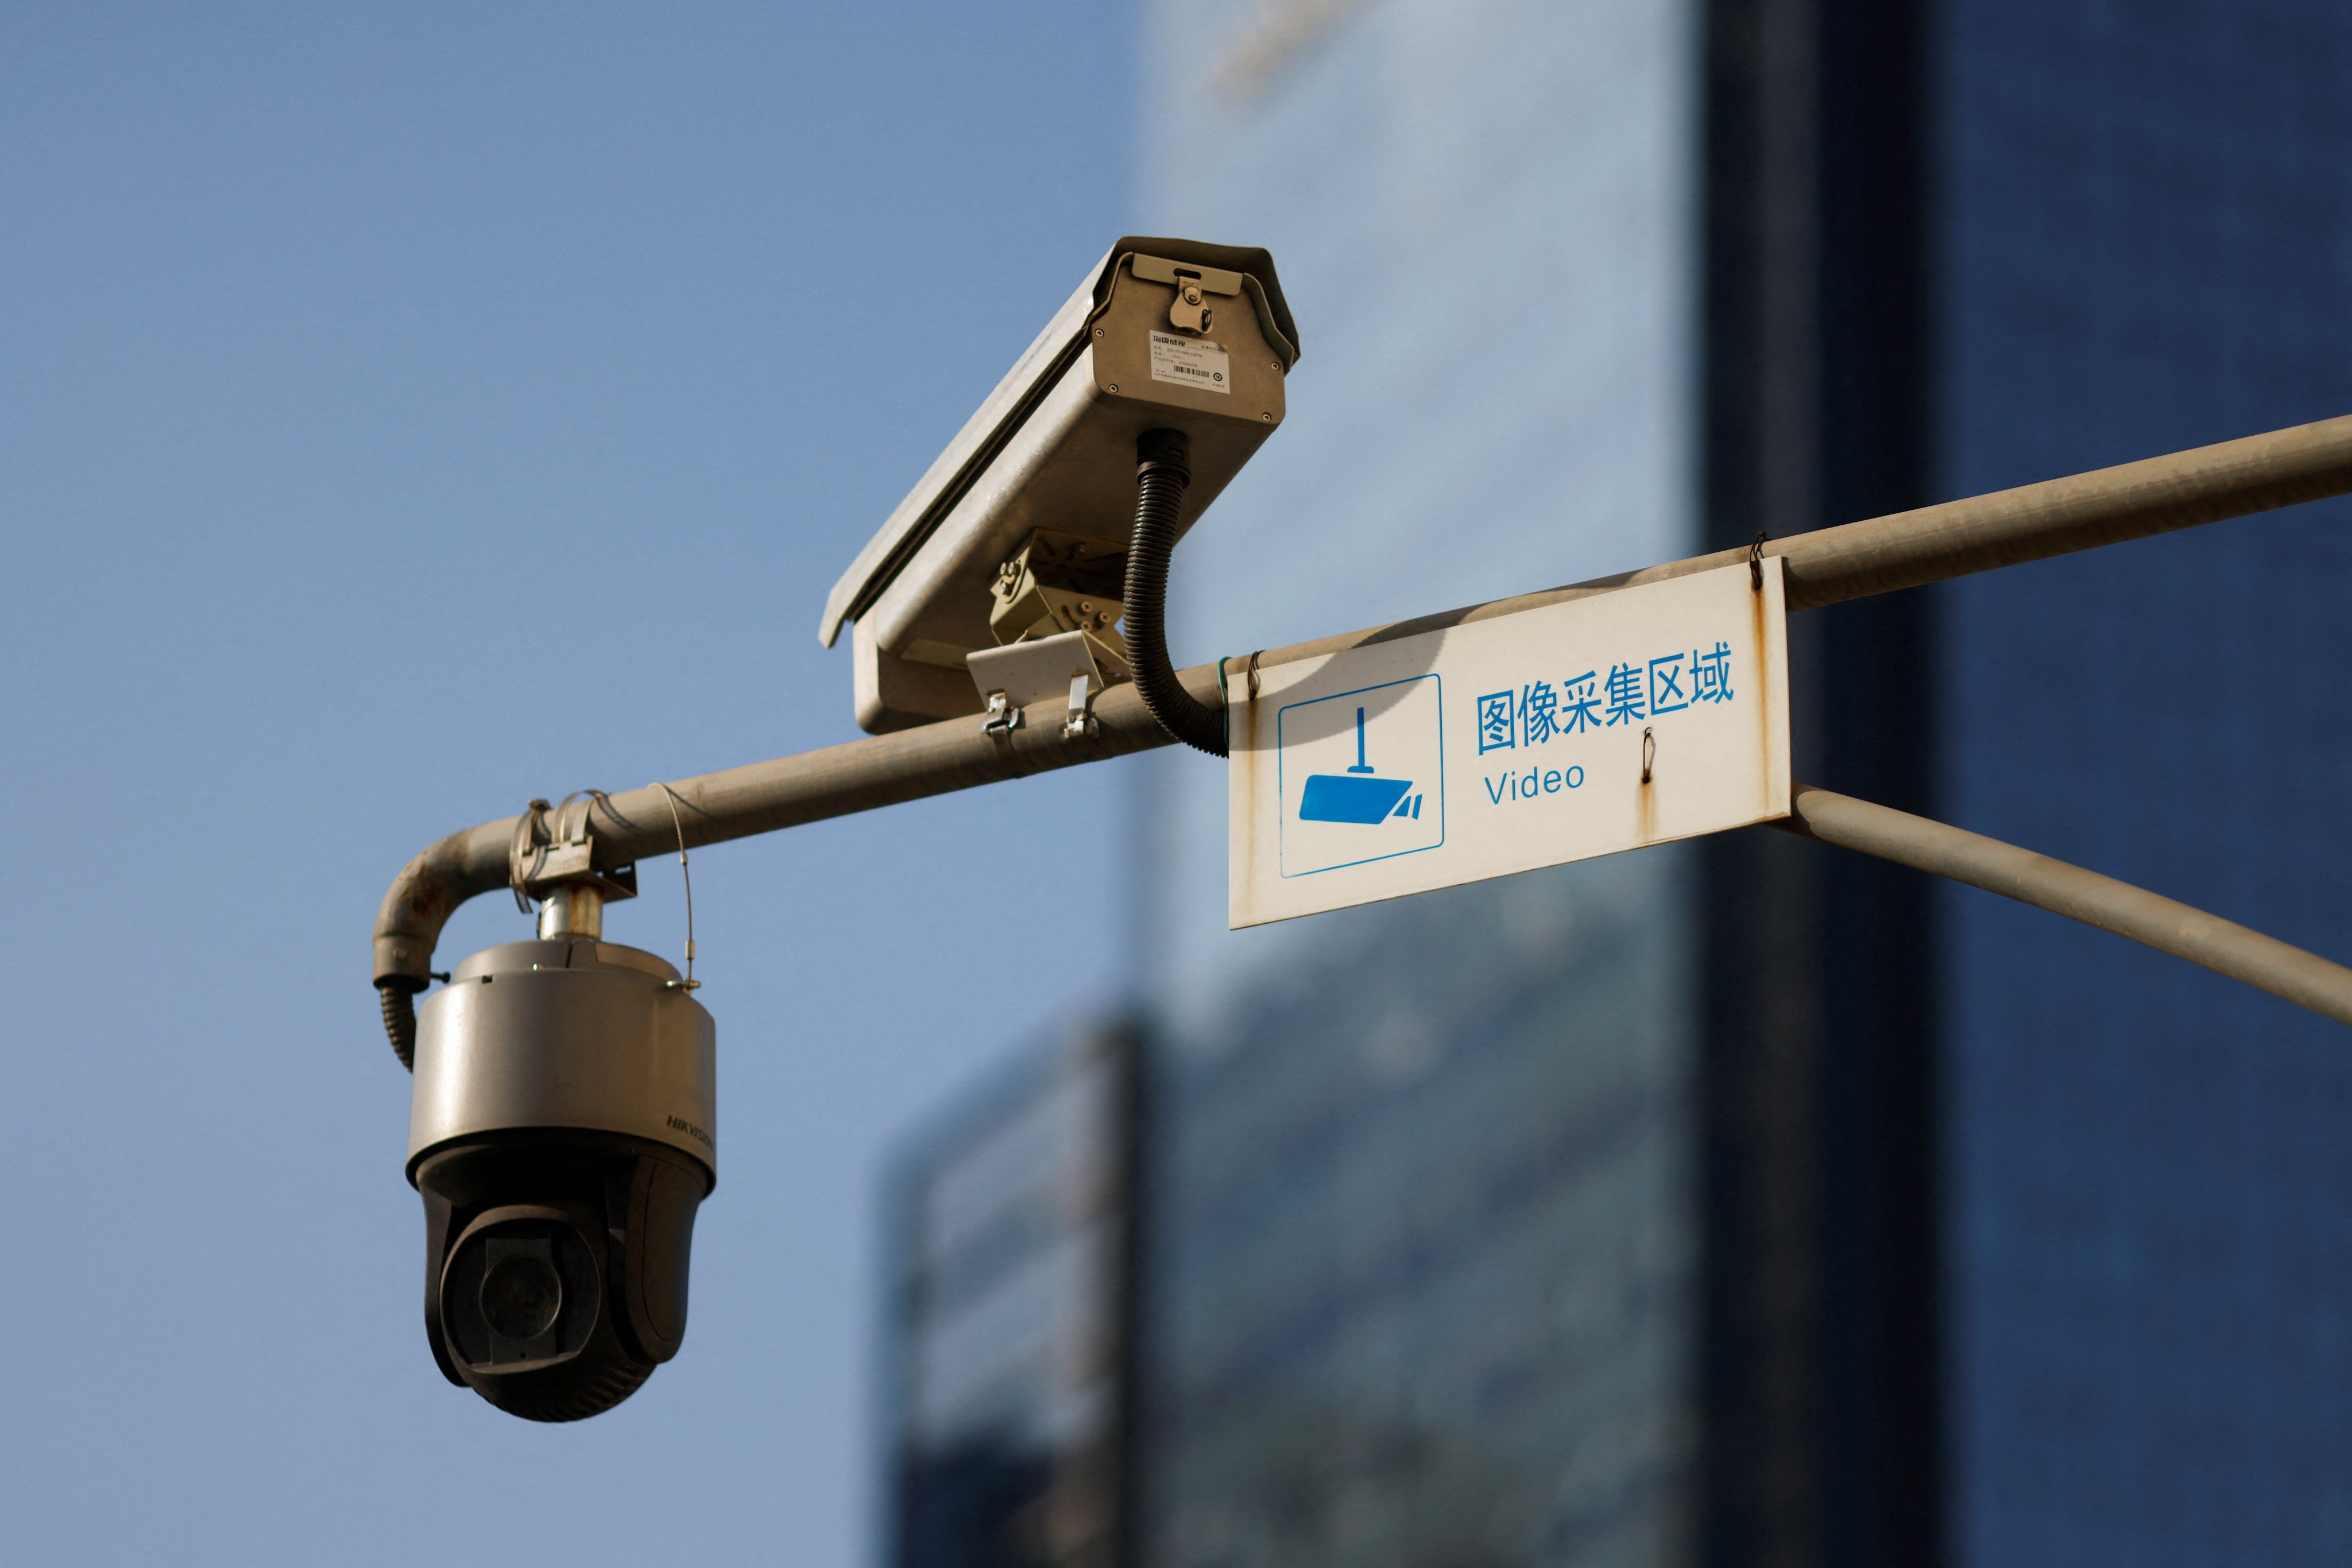 Video surveillance cameras overlooking a street in Beijing, China. If people think they are being spied on wherever they go, even if that is not so, they will be cowed, the theory goes. Photo: Reuters